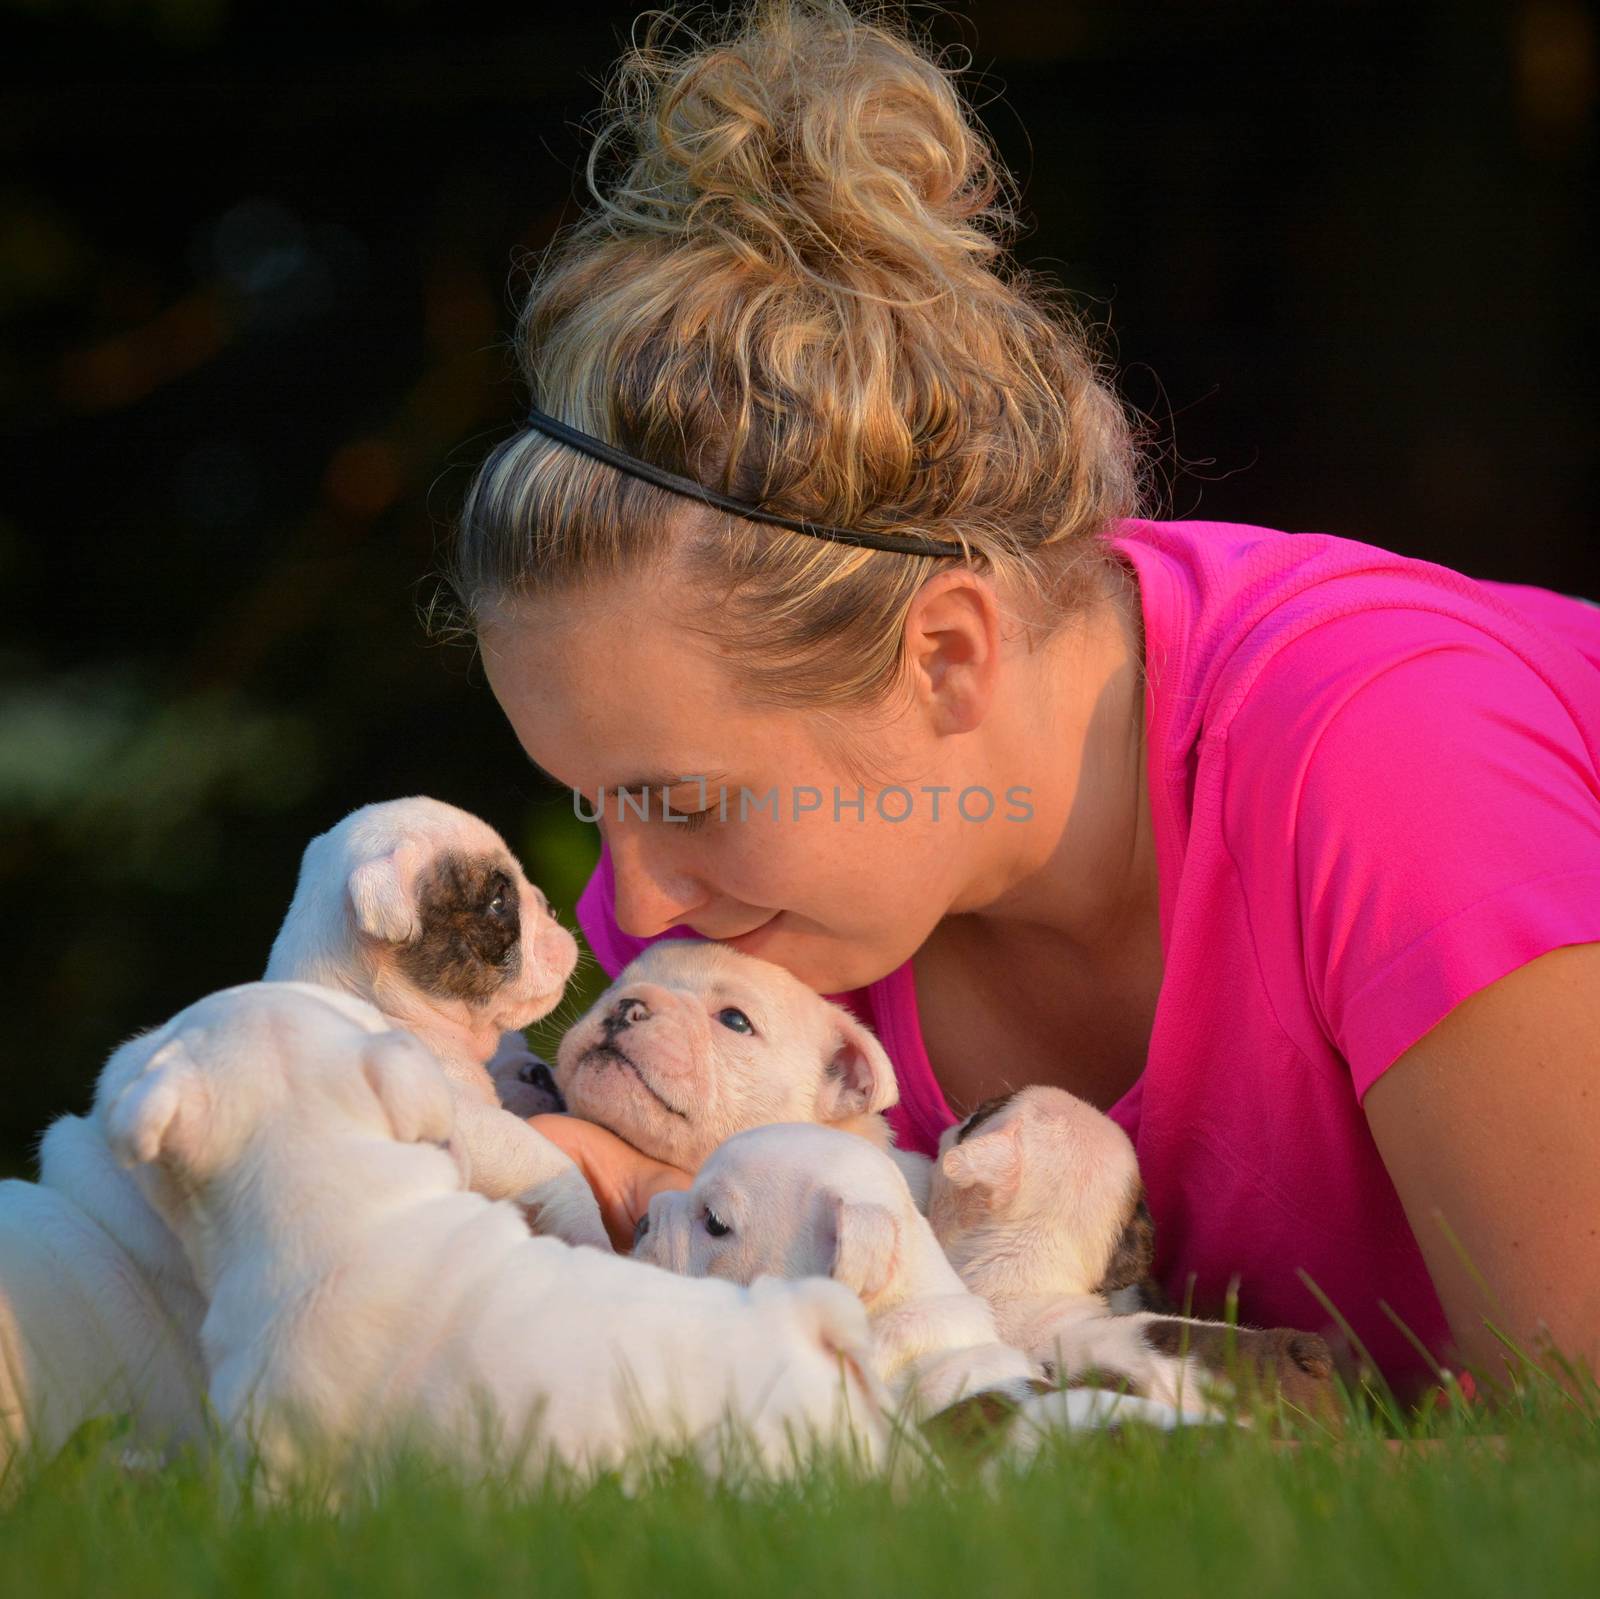 woman and litter of puppies by willeecole123